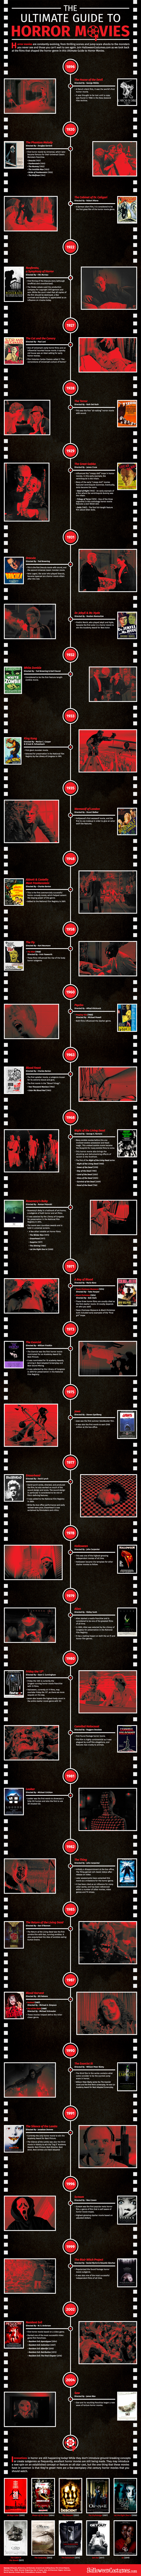 The Ultimate Guide to Horror Movies